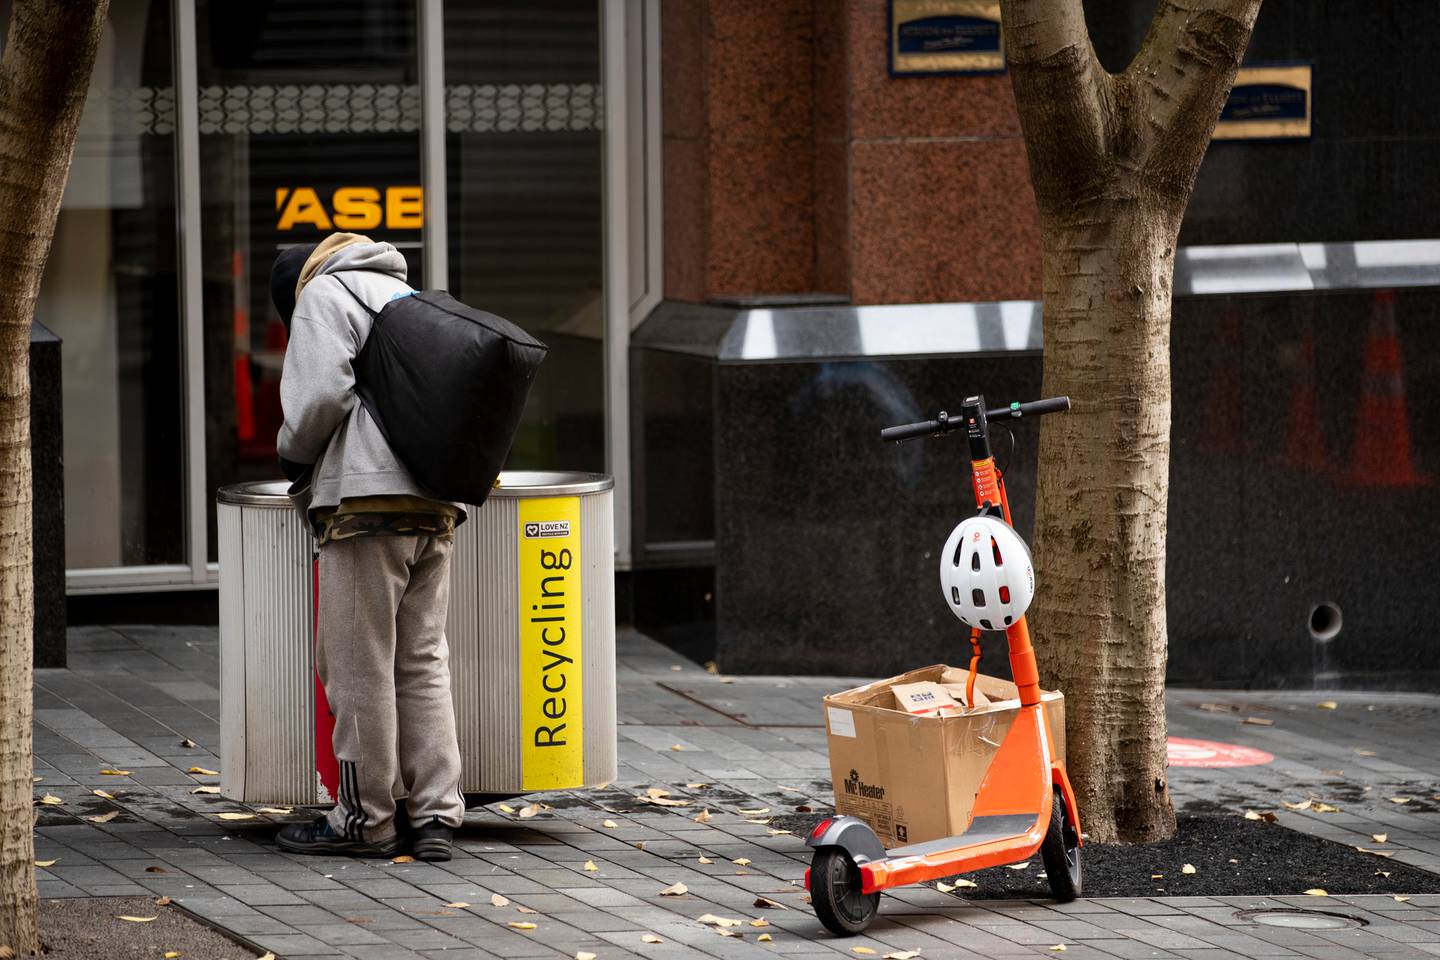 A homeless person checks rubbish bins in Auckland City. Photo / Dean Purcell, File 